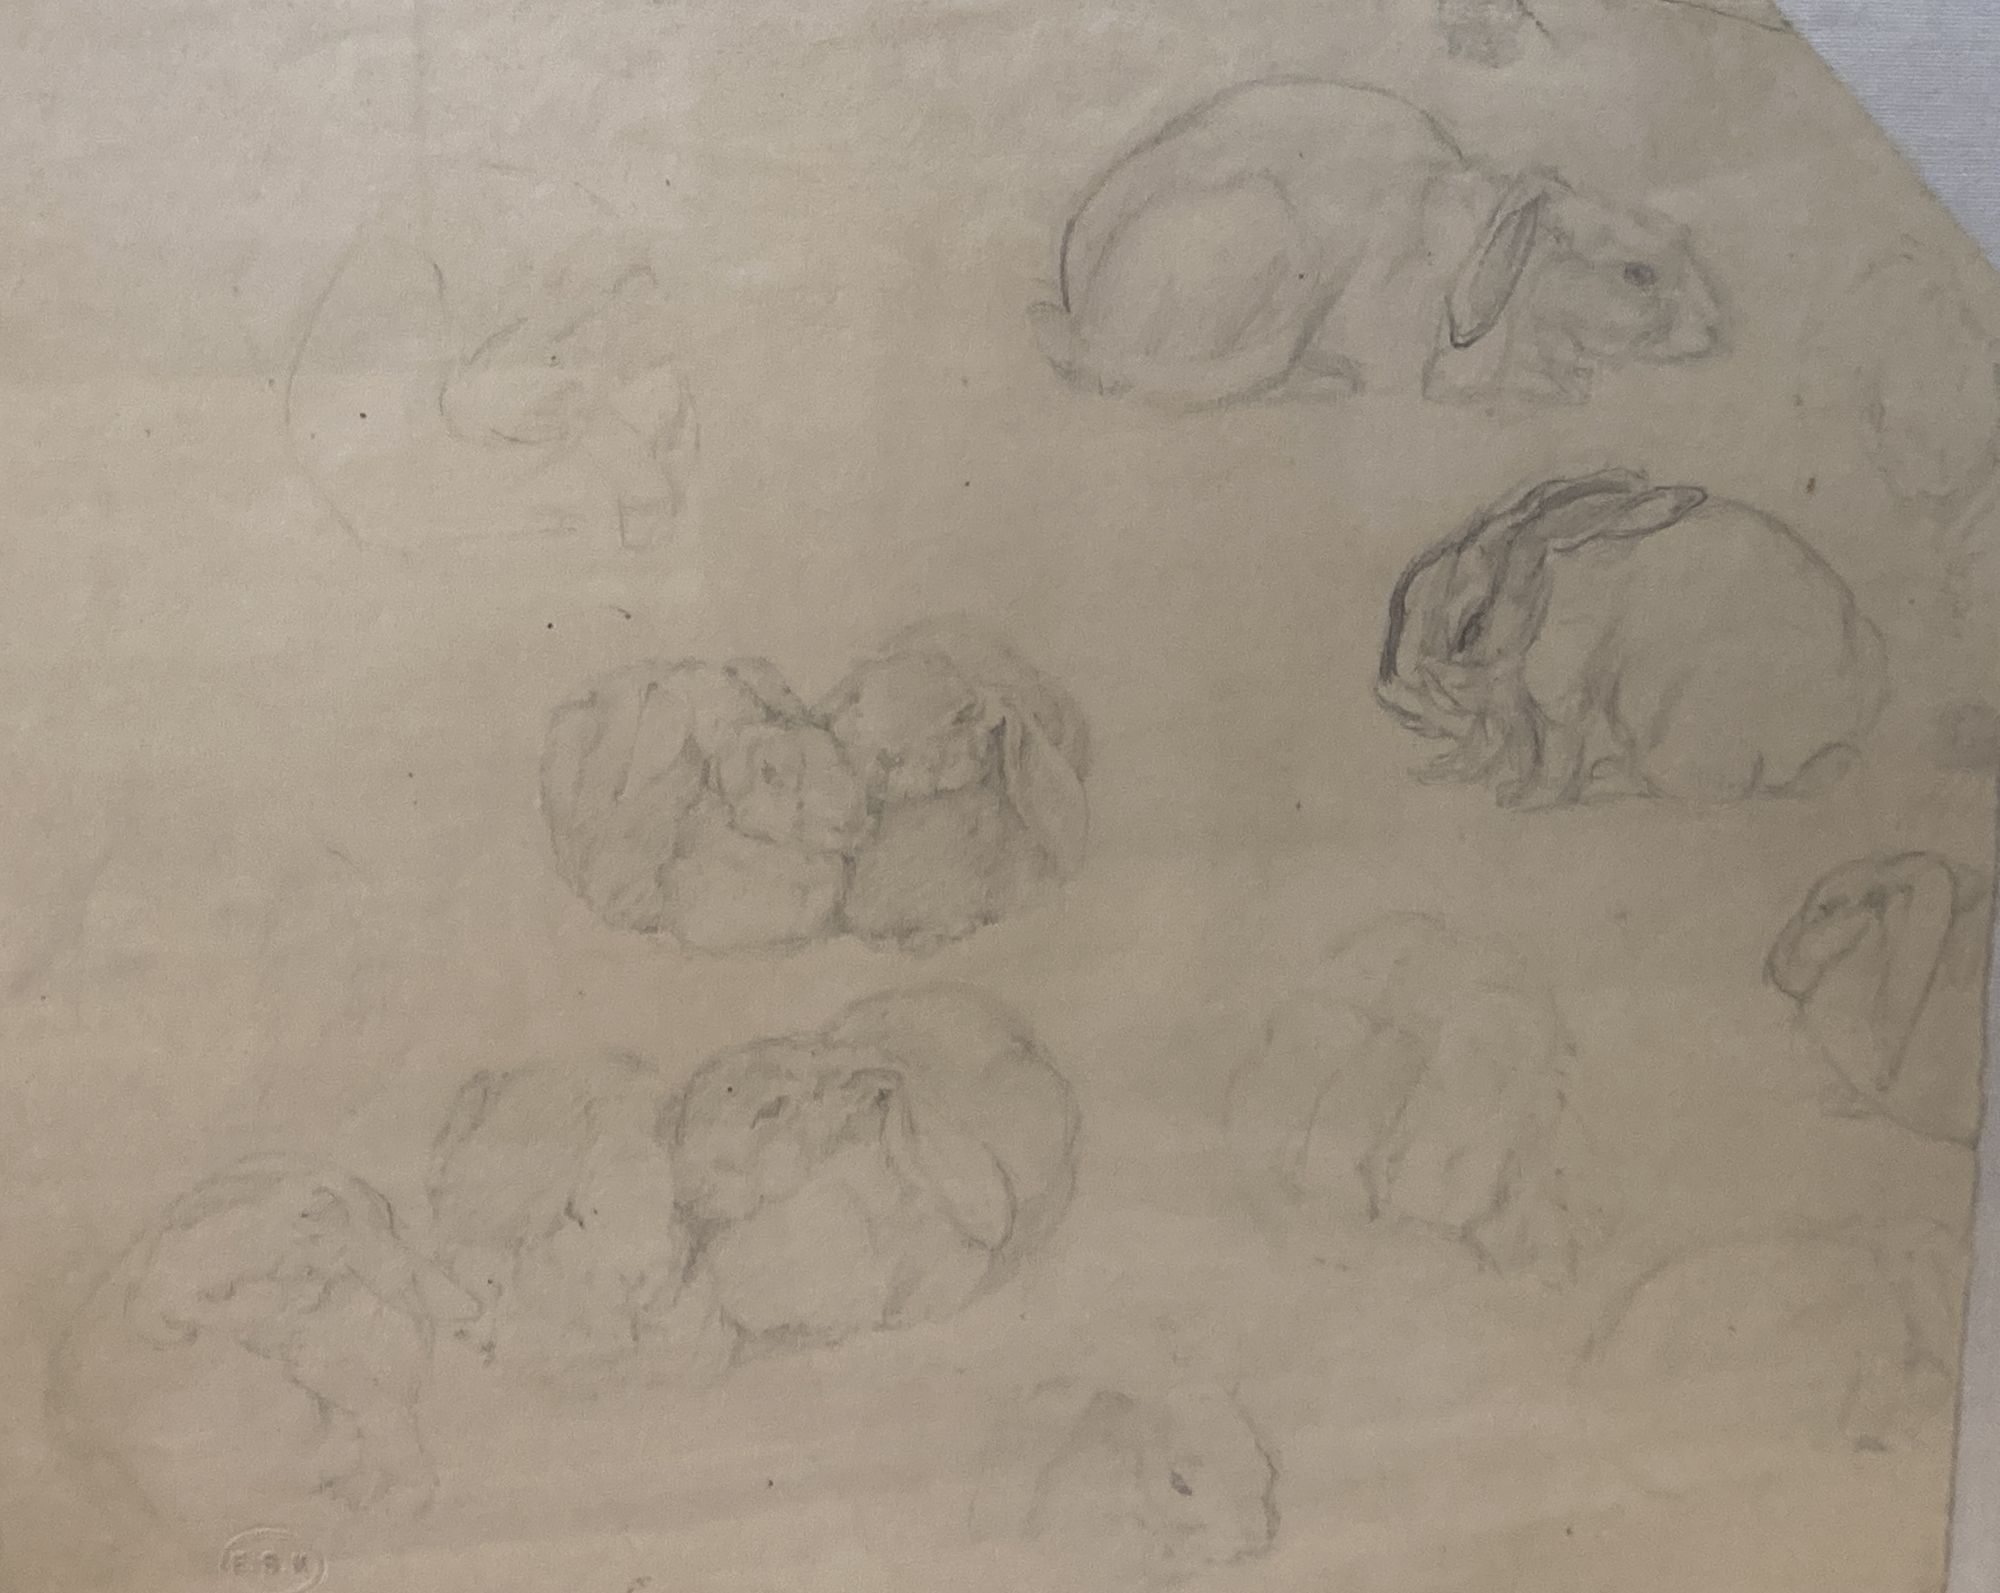 E.S.K, pencil drawing, Student sketch of rabbits, 28 x 32cm